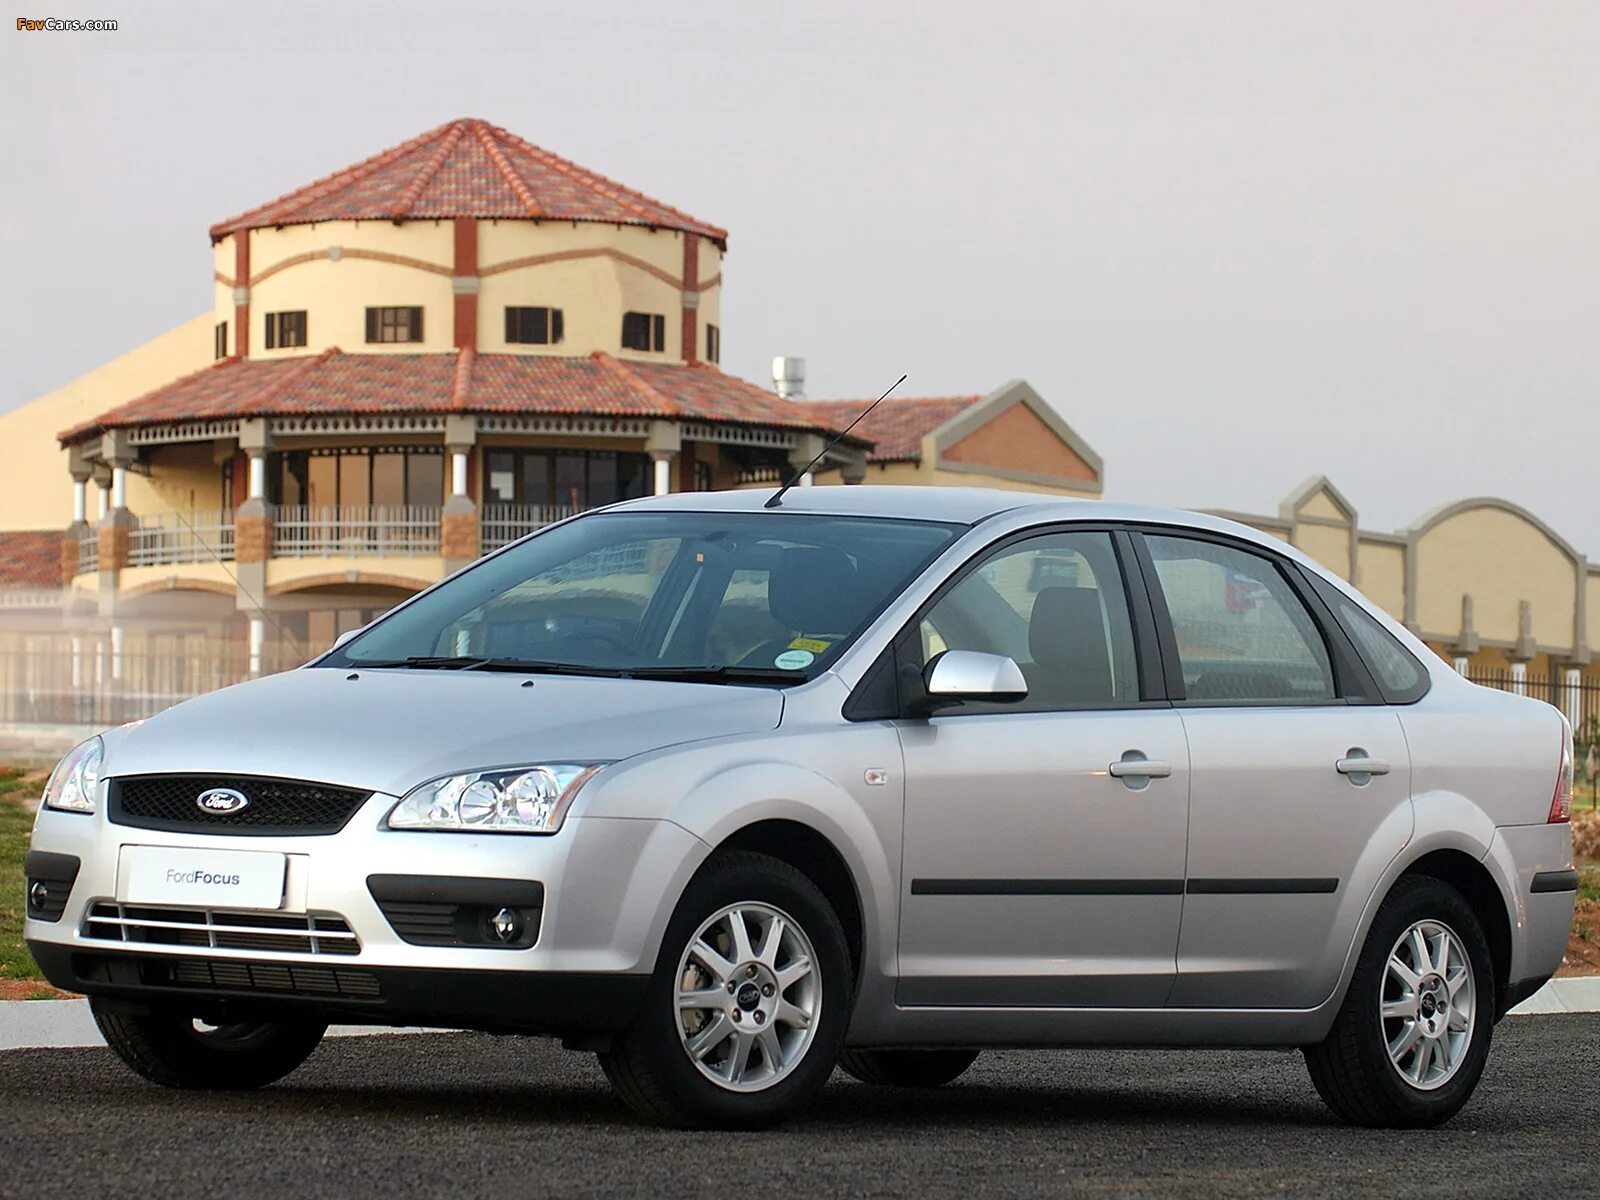 Форд 2005 г. Ford Focus 2005 седан. Ford Focus 2 2005 седан. Форд фокус 1 2005г. Форд фокус 2005 седан.